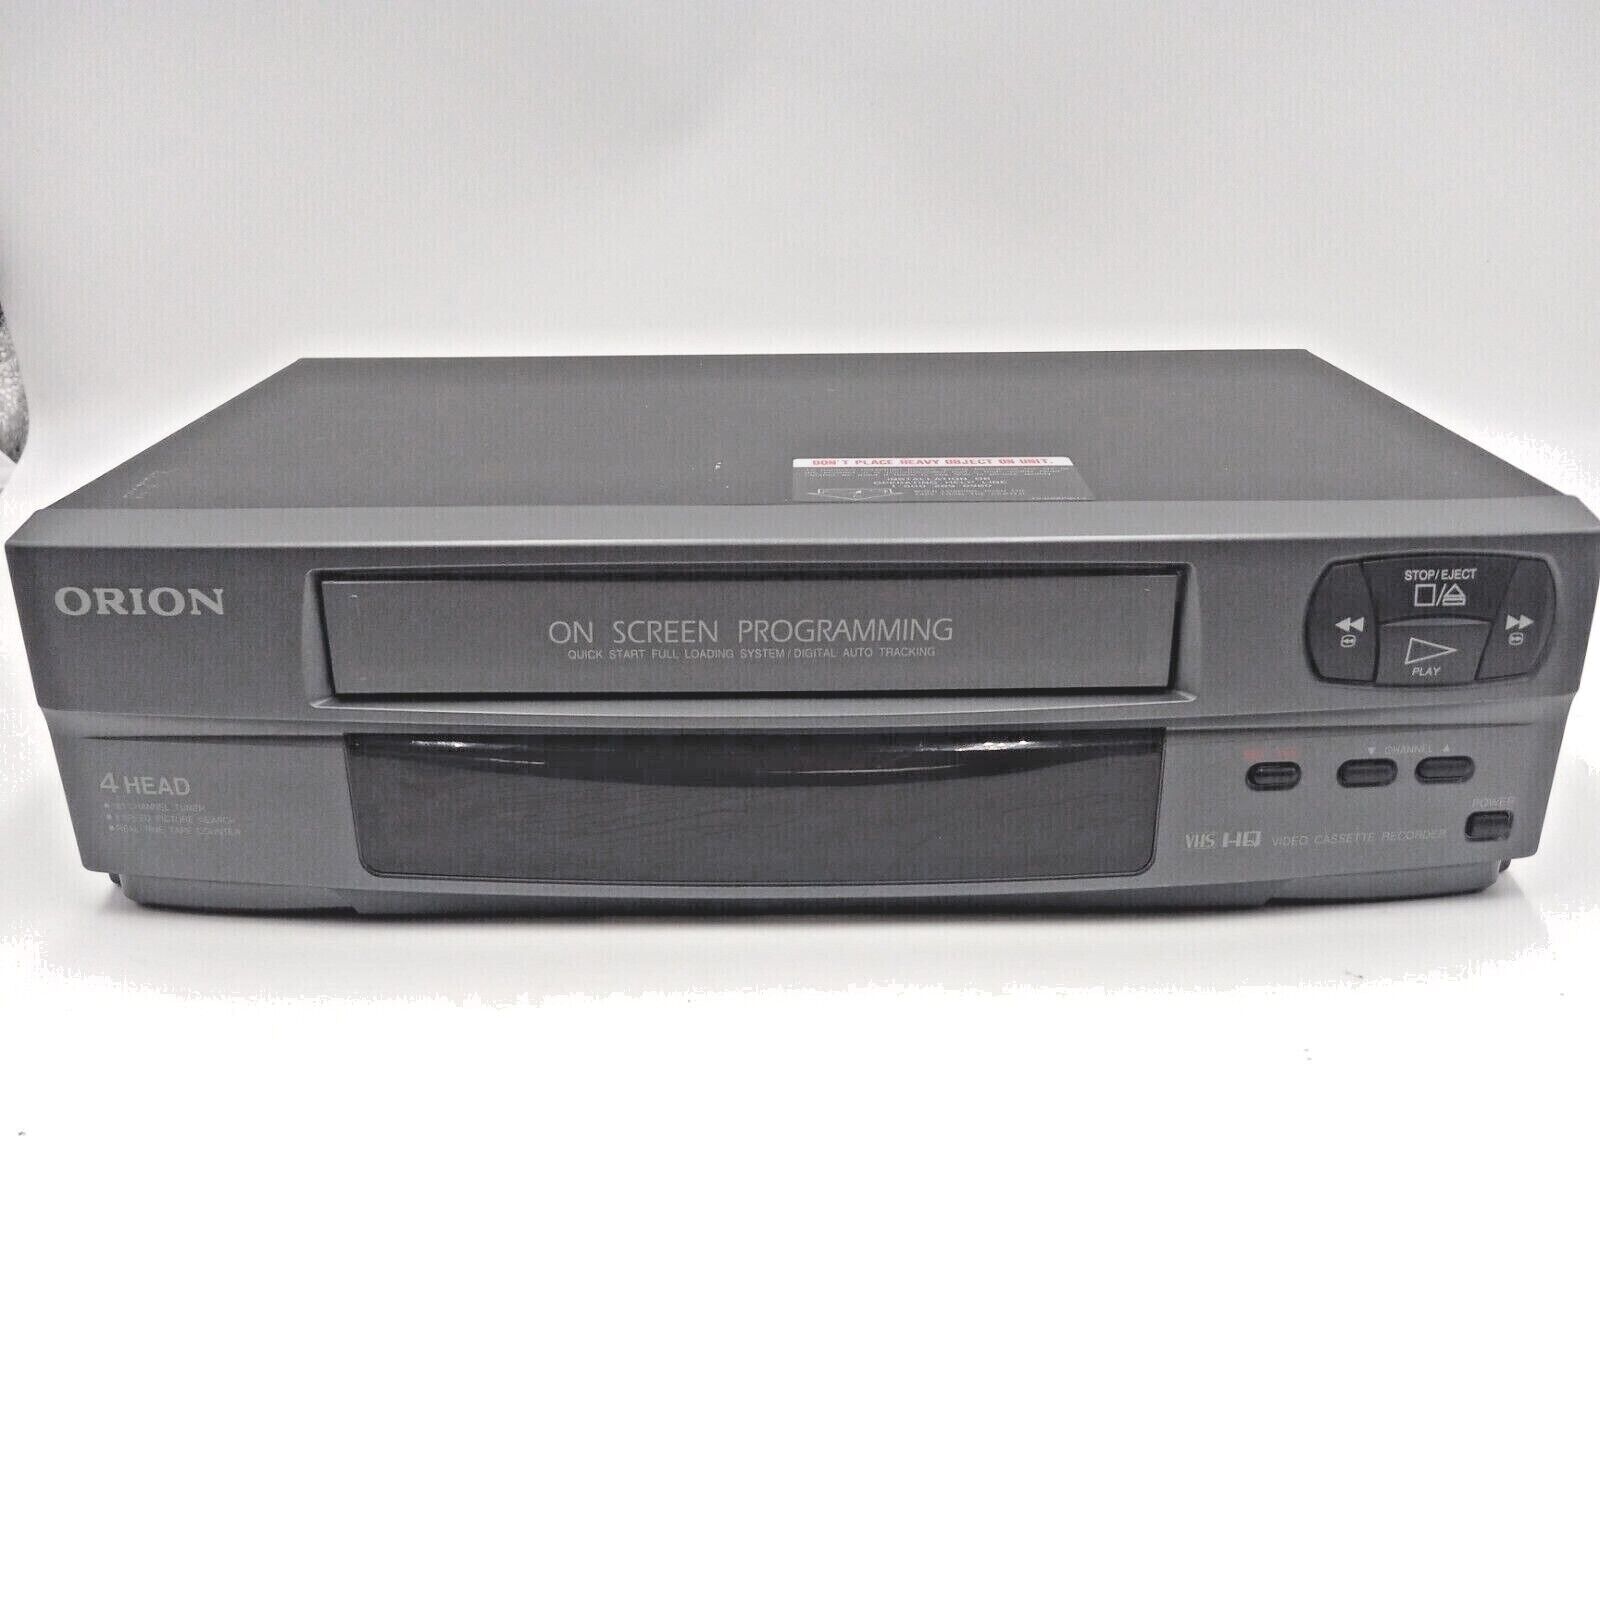 Orion Electric Vr0419 Vhs Vcr.    No Remote